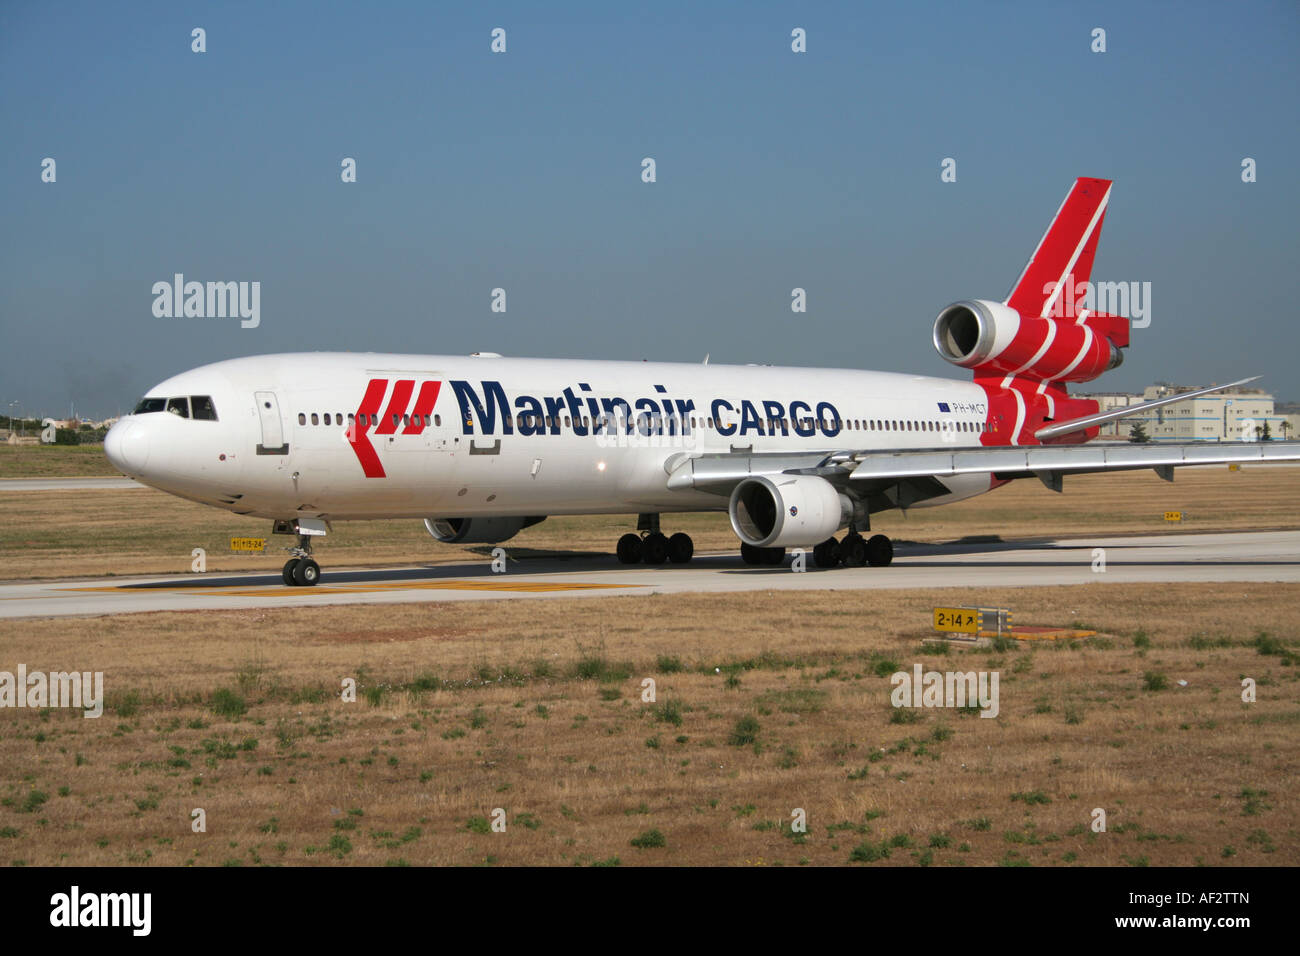 McDonnell Douglas MD-11 jet plane operated by Martinair Cargo taxiing on the ground Stock Photo